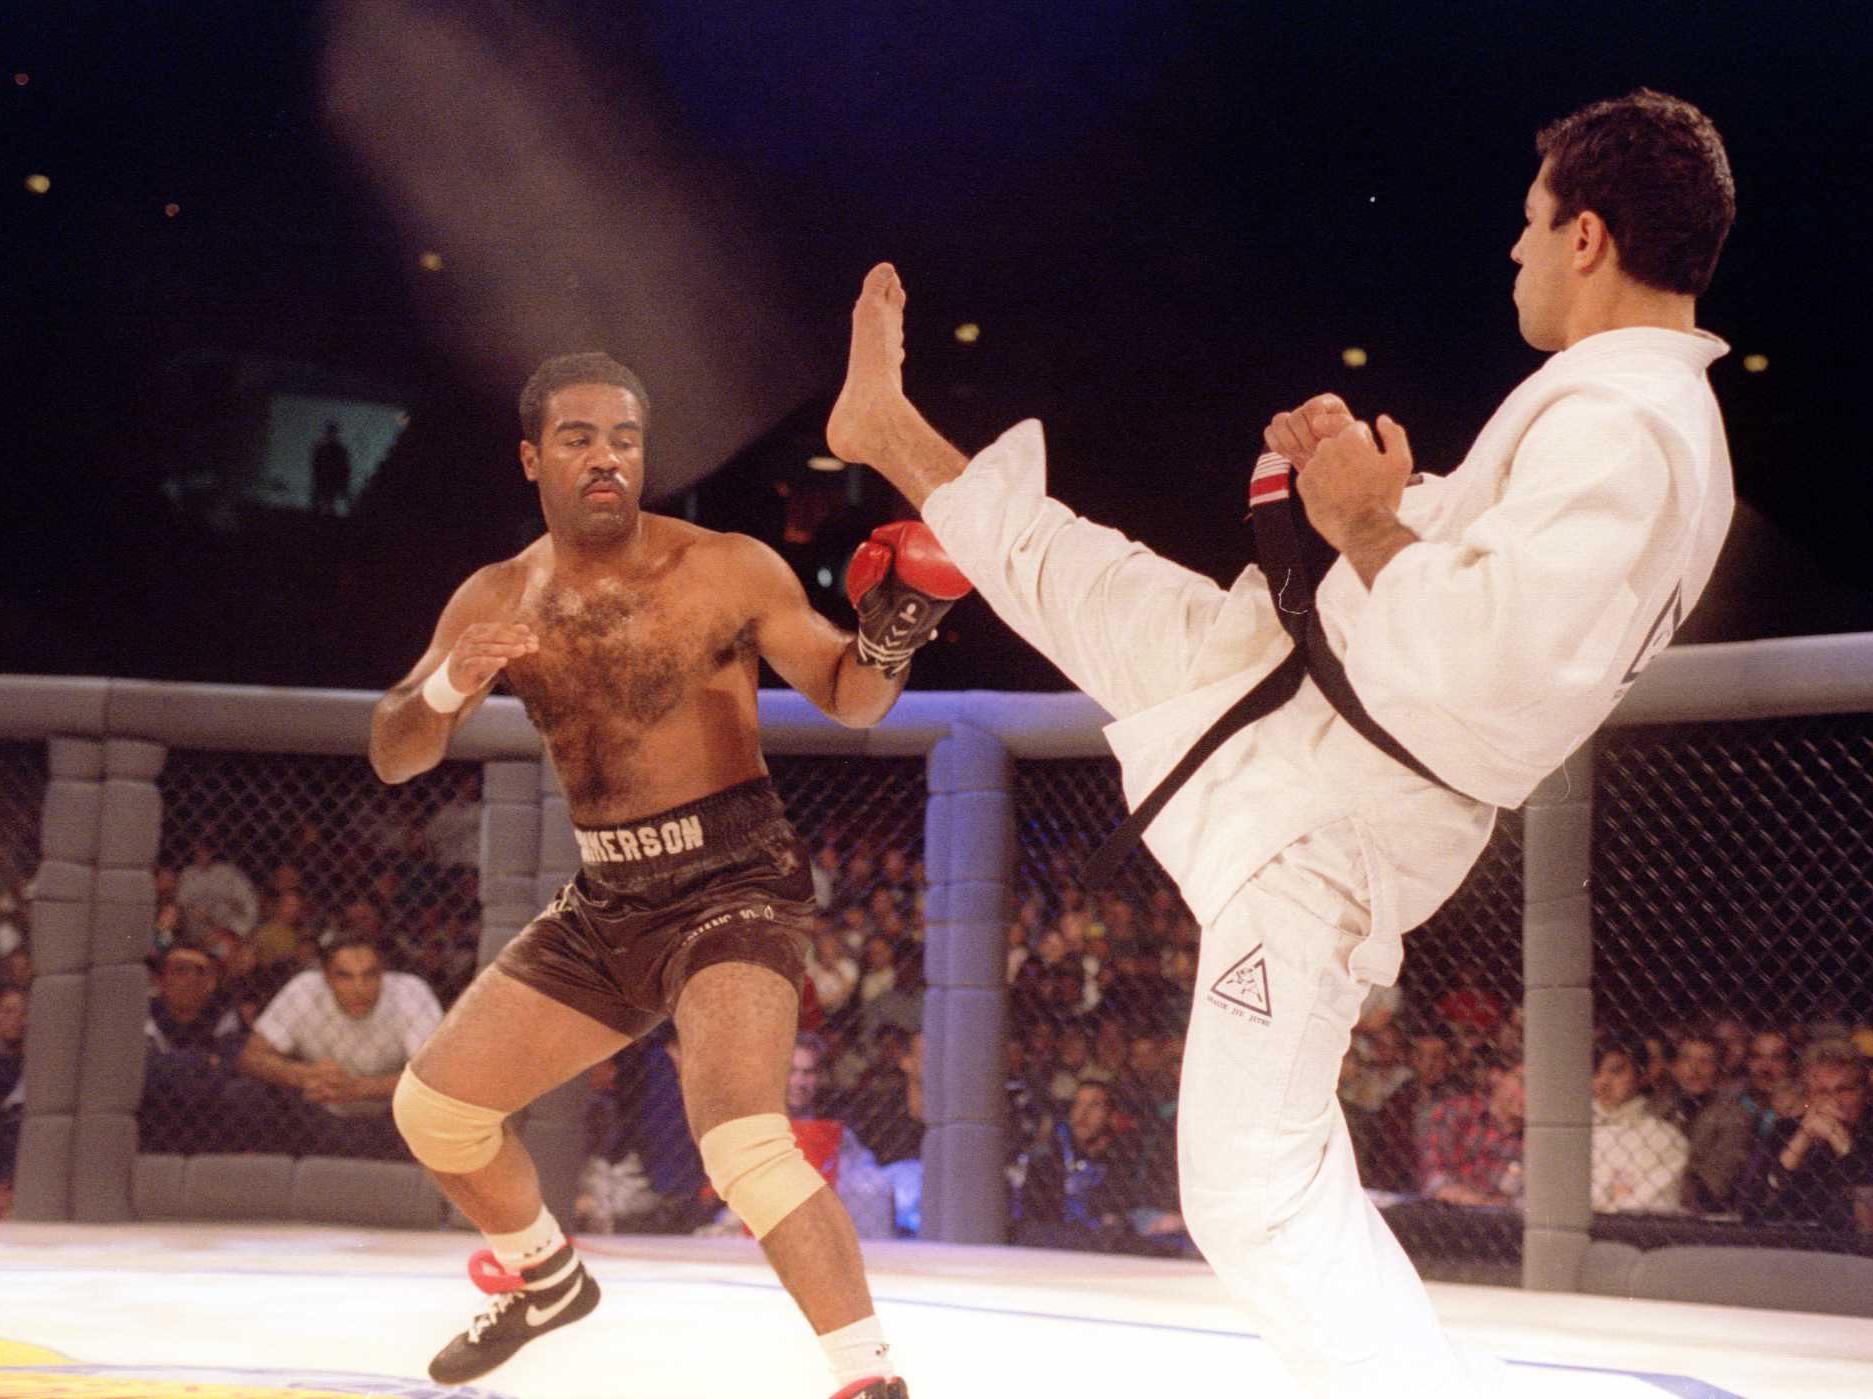 Gracie began his UFC 1 campaign by defeating Art Jimmerson